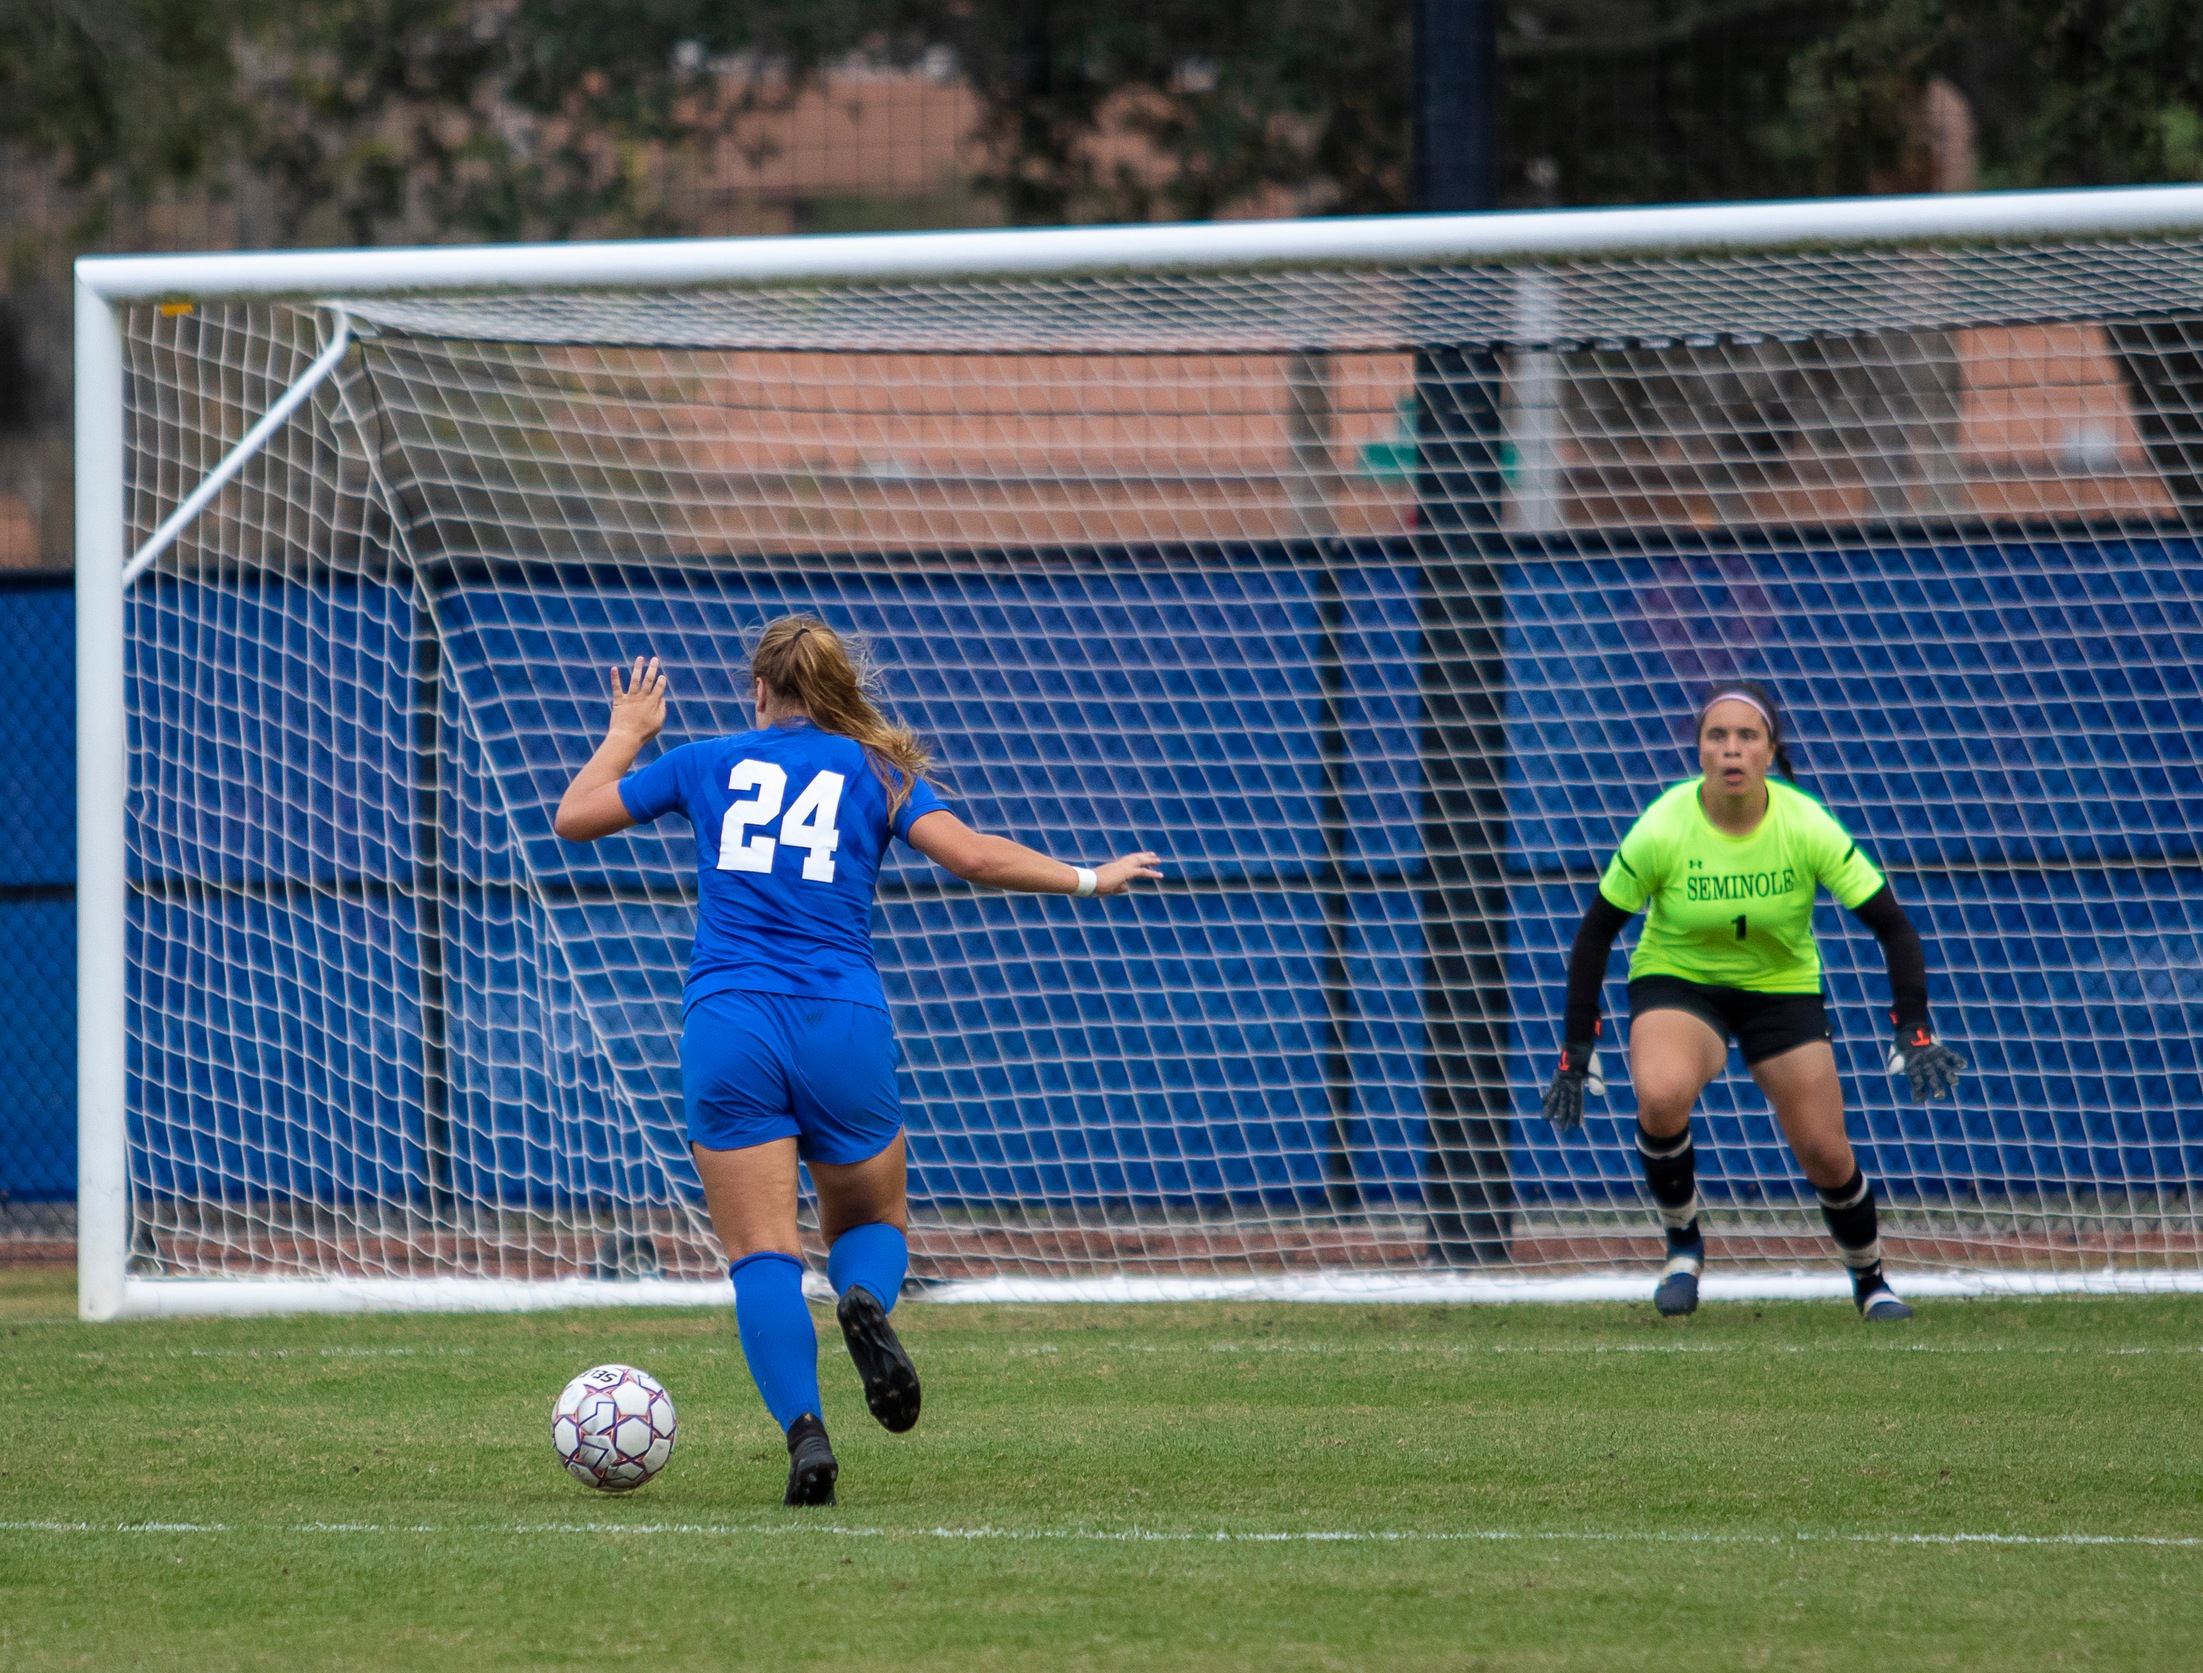 EFSC women's soccer team faces Tyler Junior College in national championship